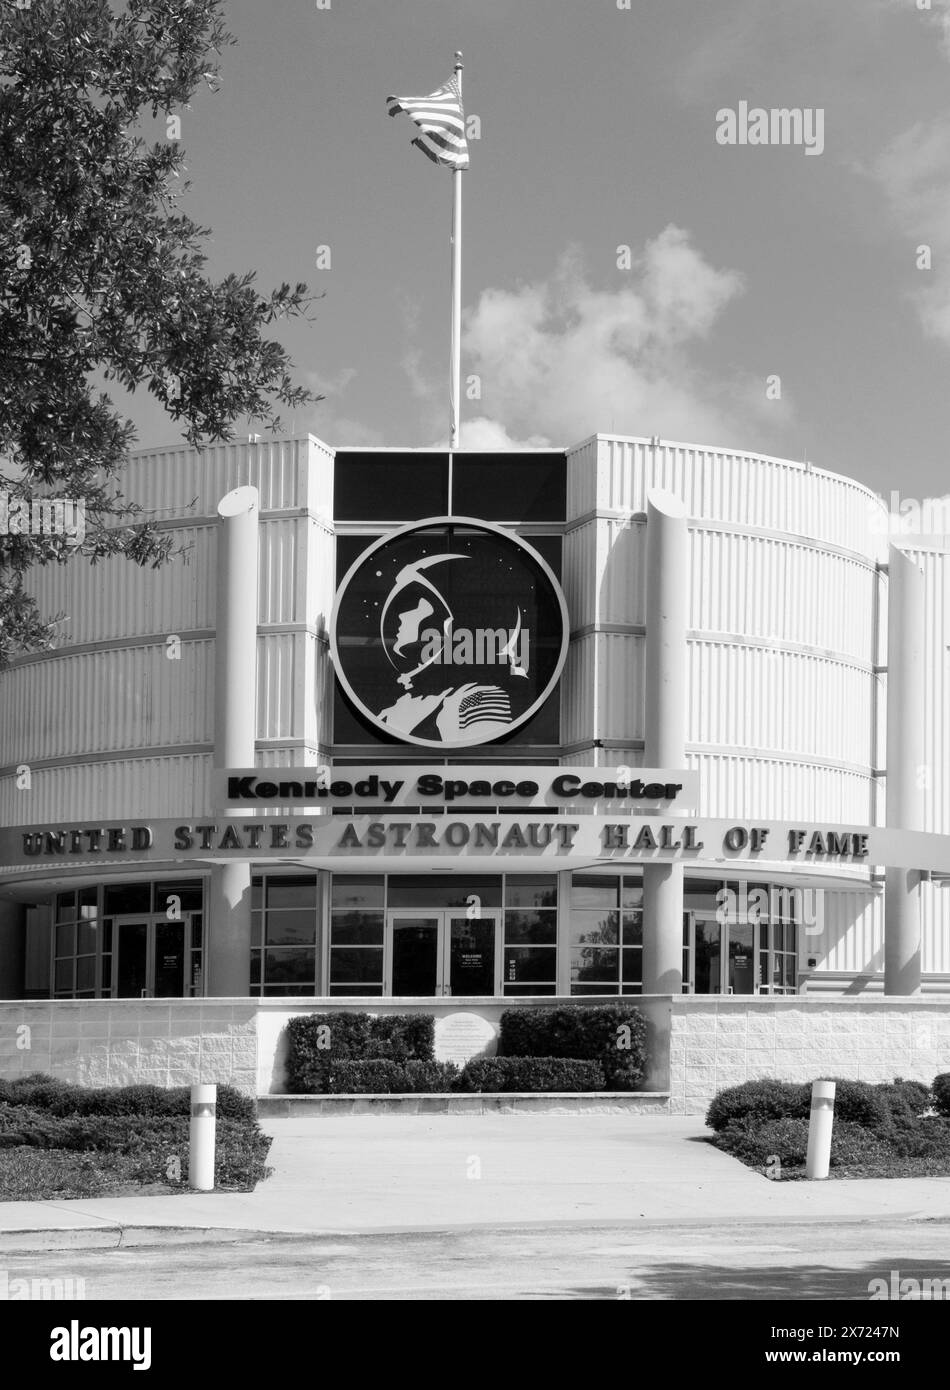 United States Astronaut Hall of Fame au John F. Kennedy Space Center Visitor Complex, Titusville, Floride, États-Unis. Banque D'Images